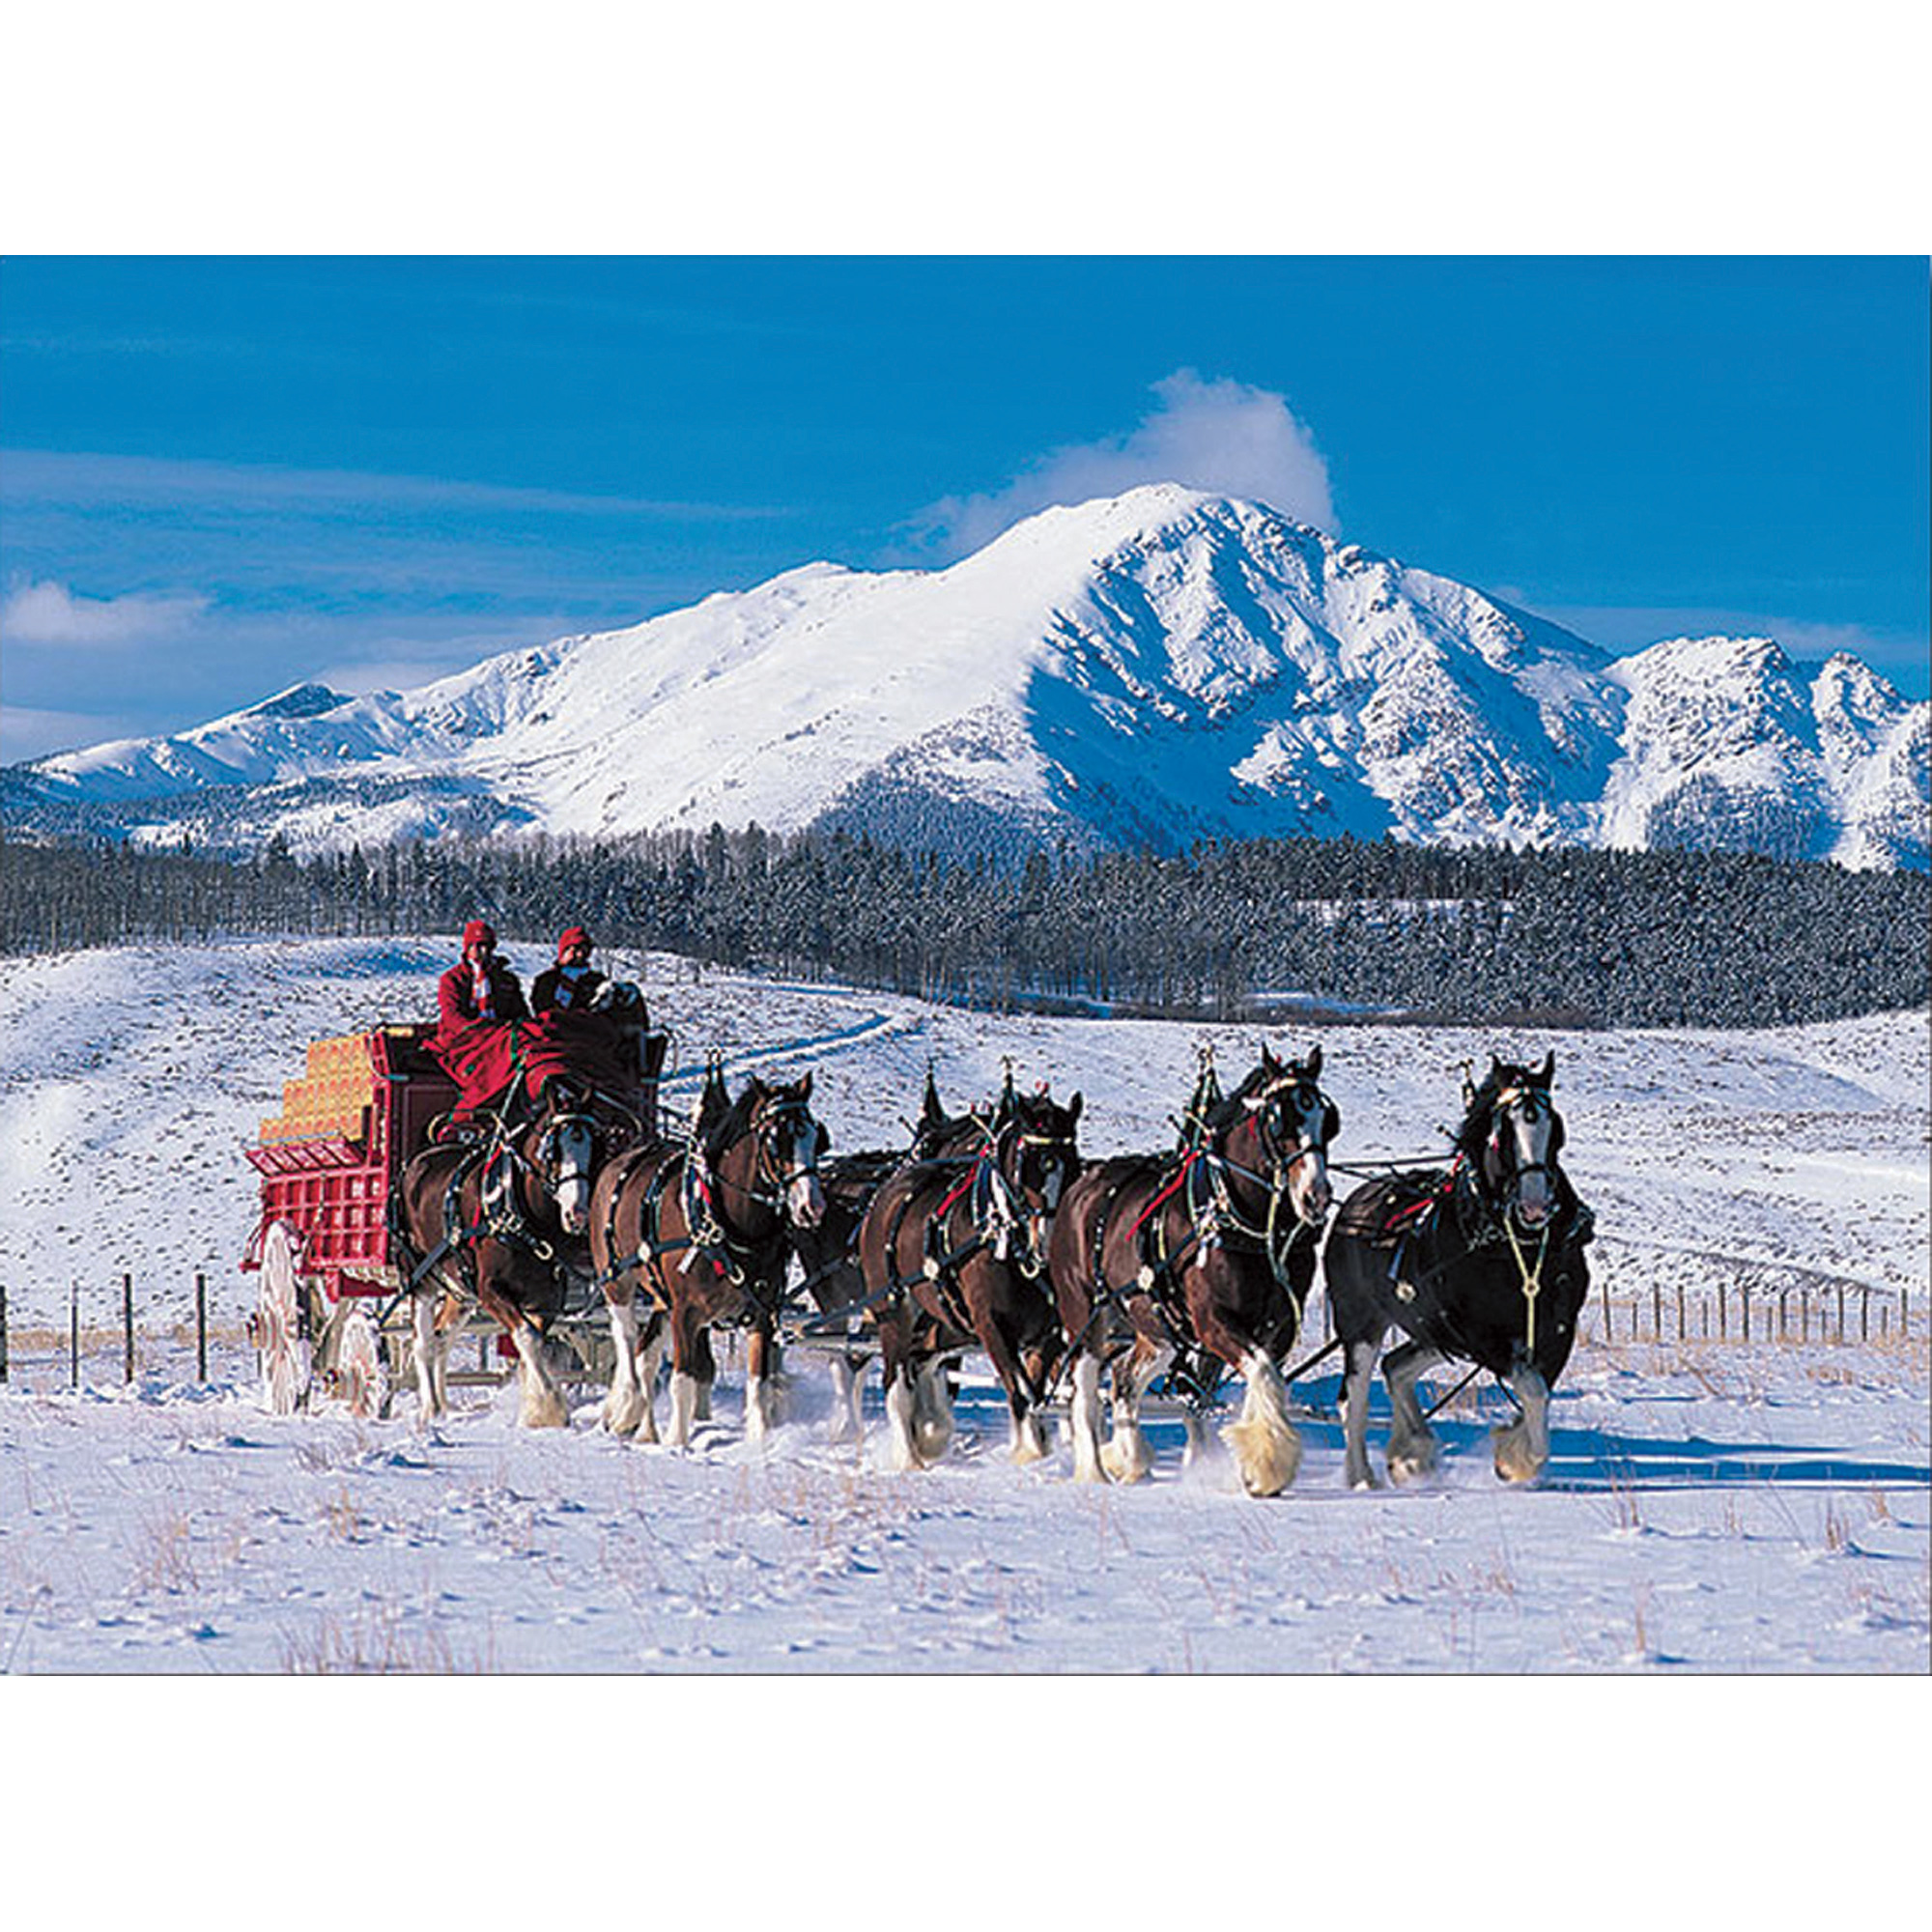 Displaying 18 Images For   Budweiser Clydesdale Horses In Snow